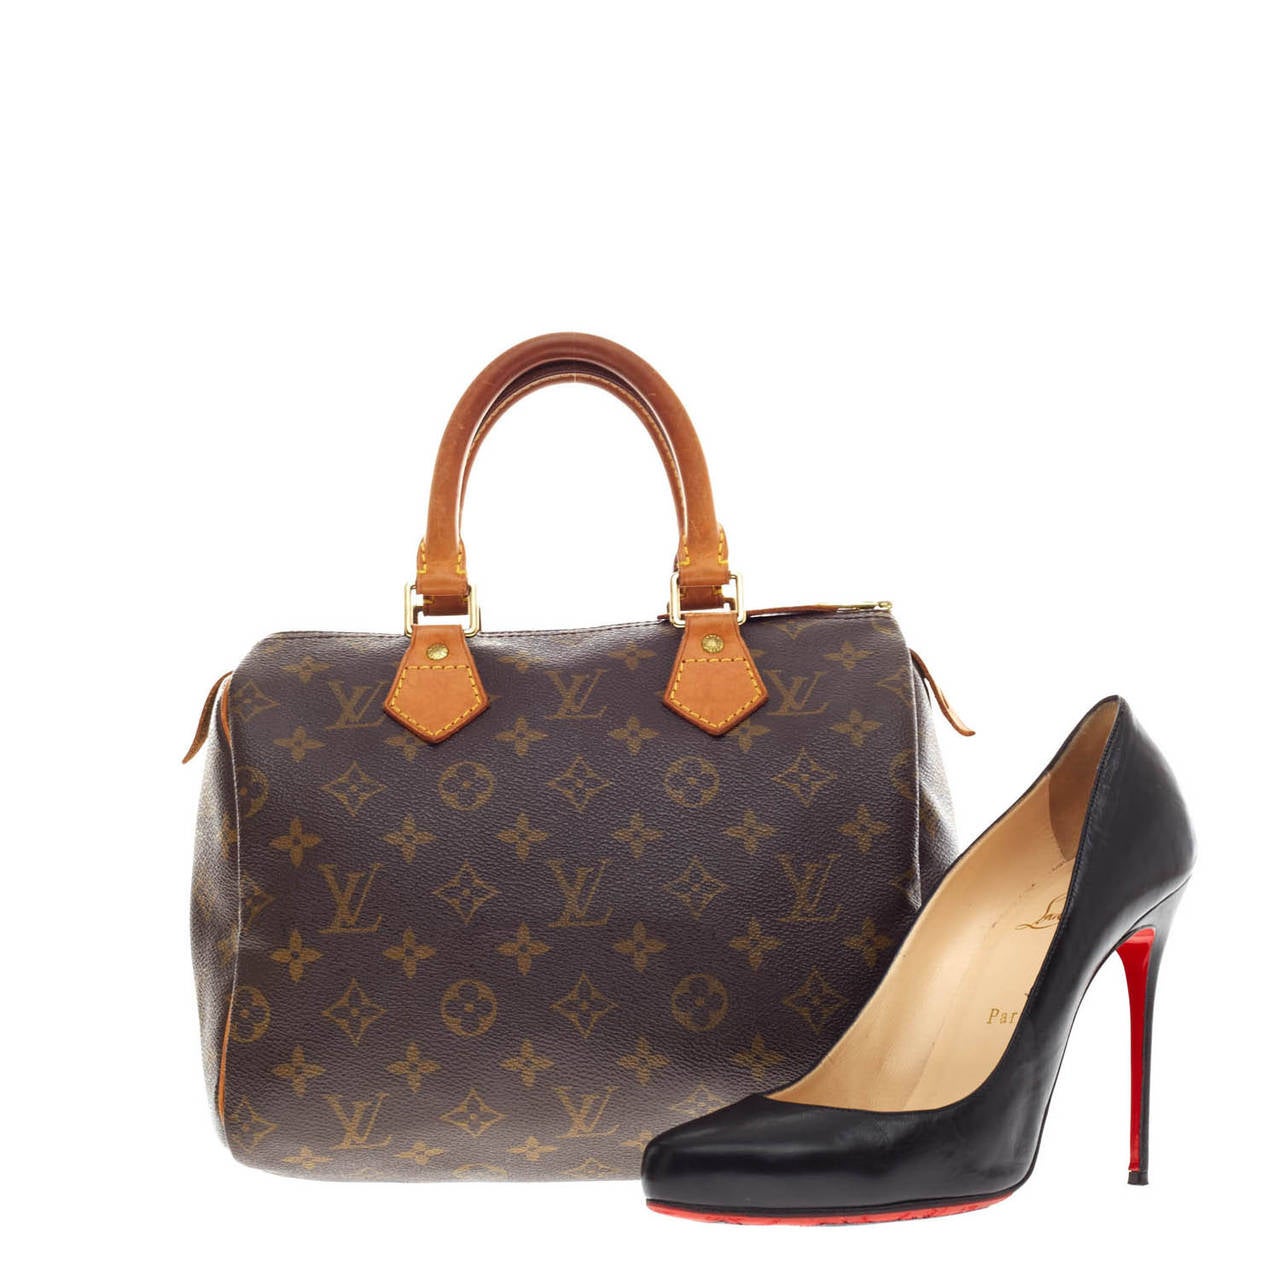 This authentic Louis Vuitton Speedy Monogram Canvas in size 25 is an iconic must-have piece. Crafted from Louis Vuitton's signature monogram print canvas, this bag features brass hardware and cowhide leather trimming and handles. This light and